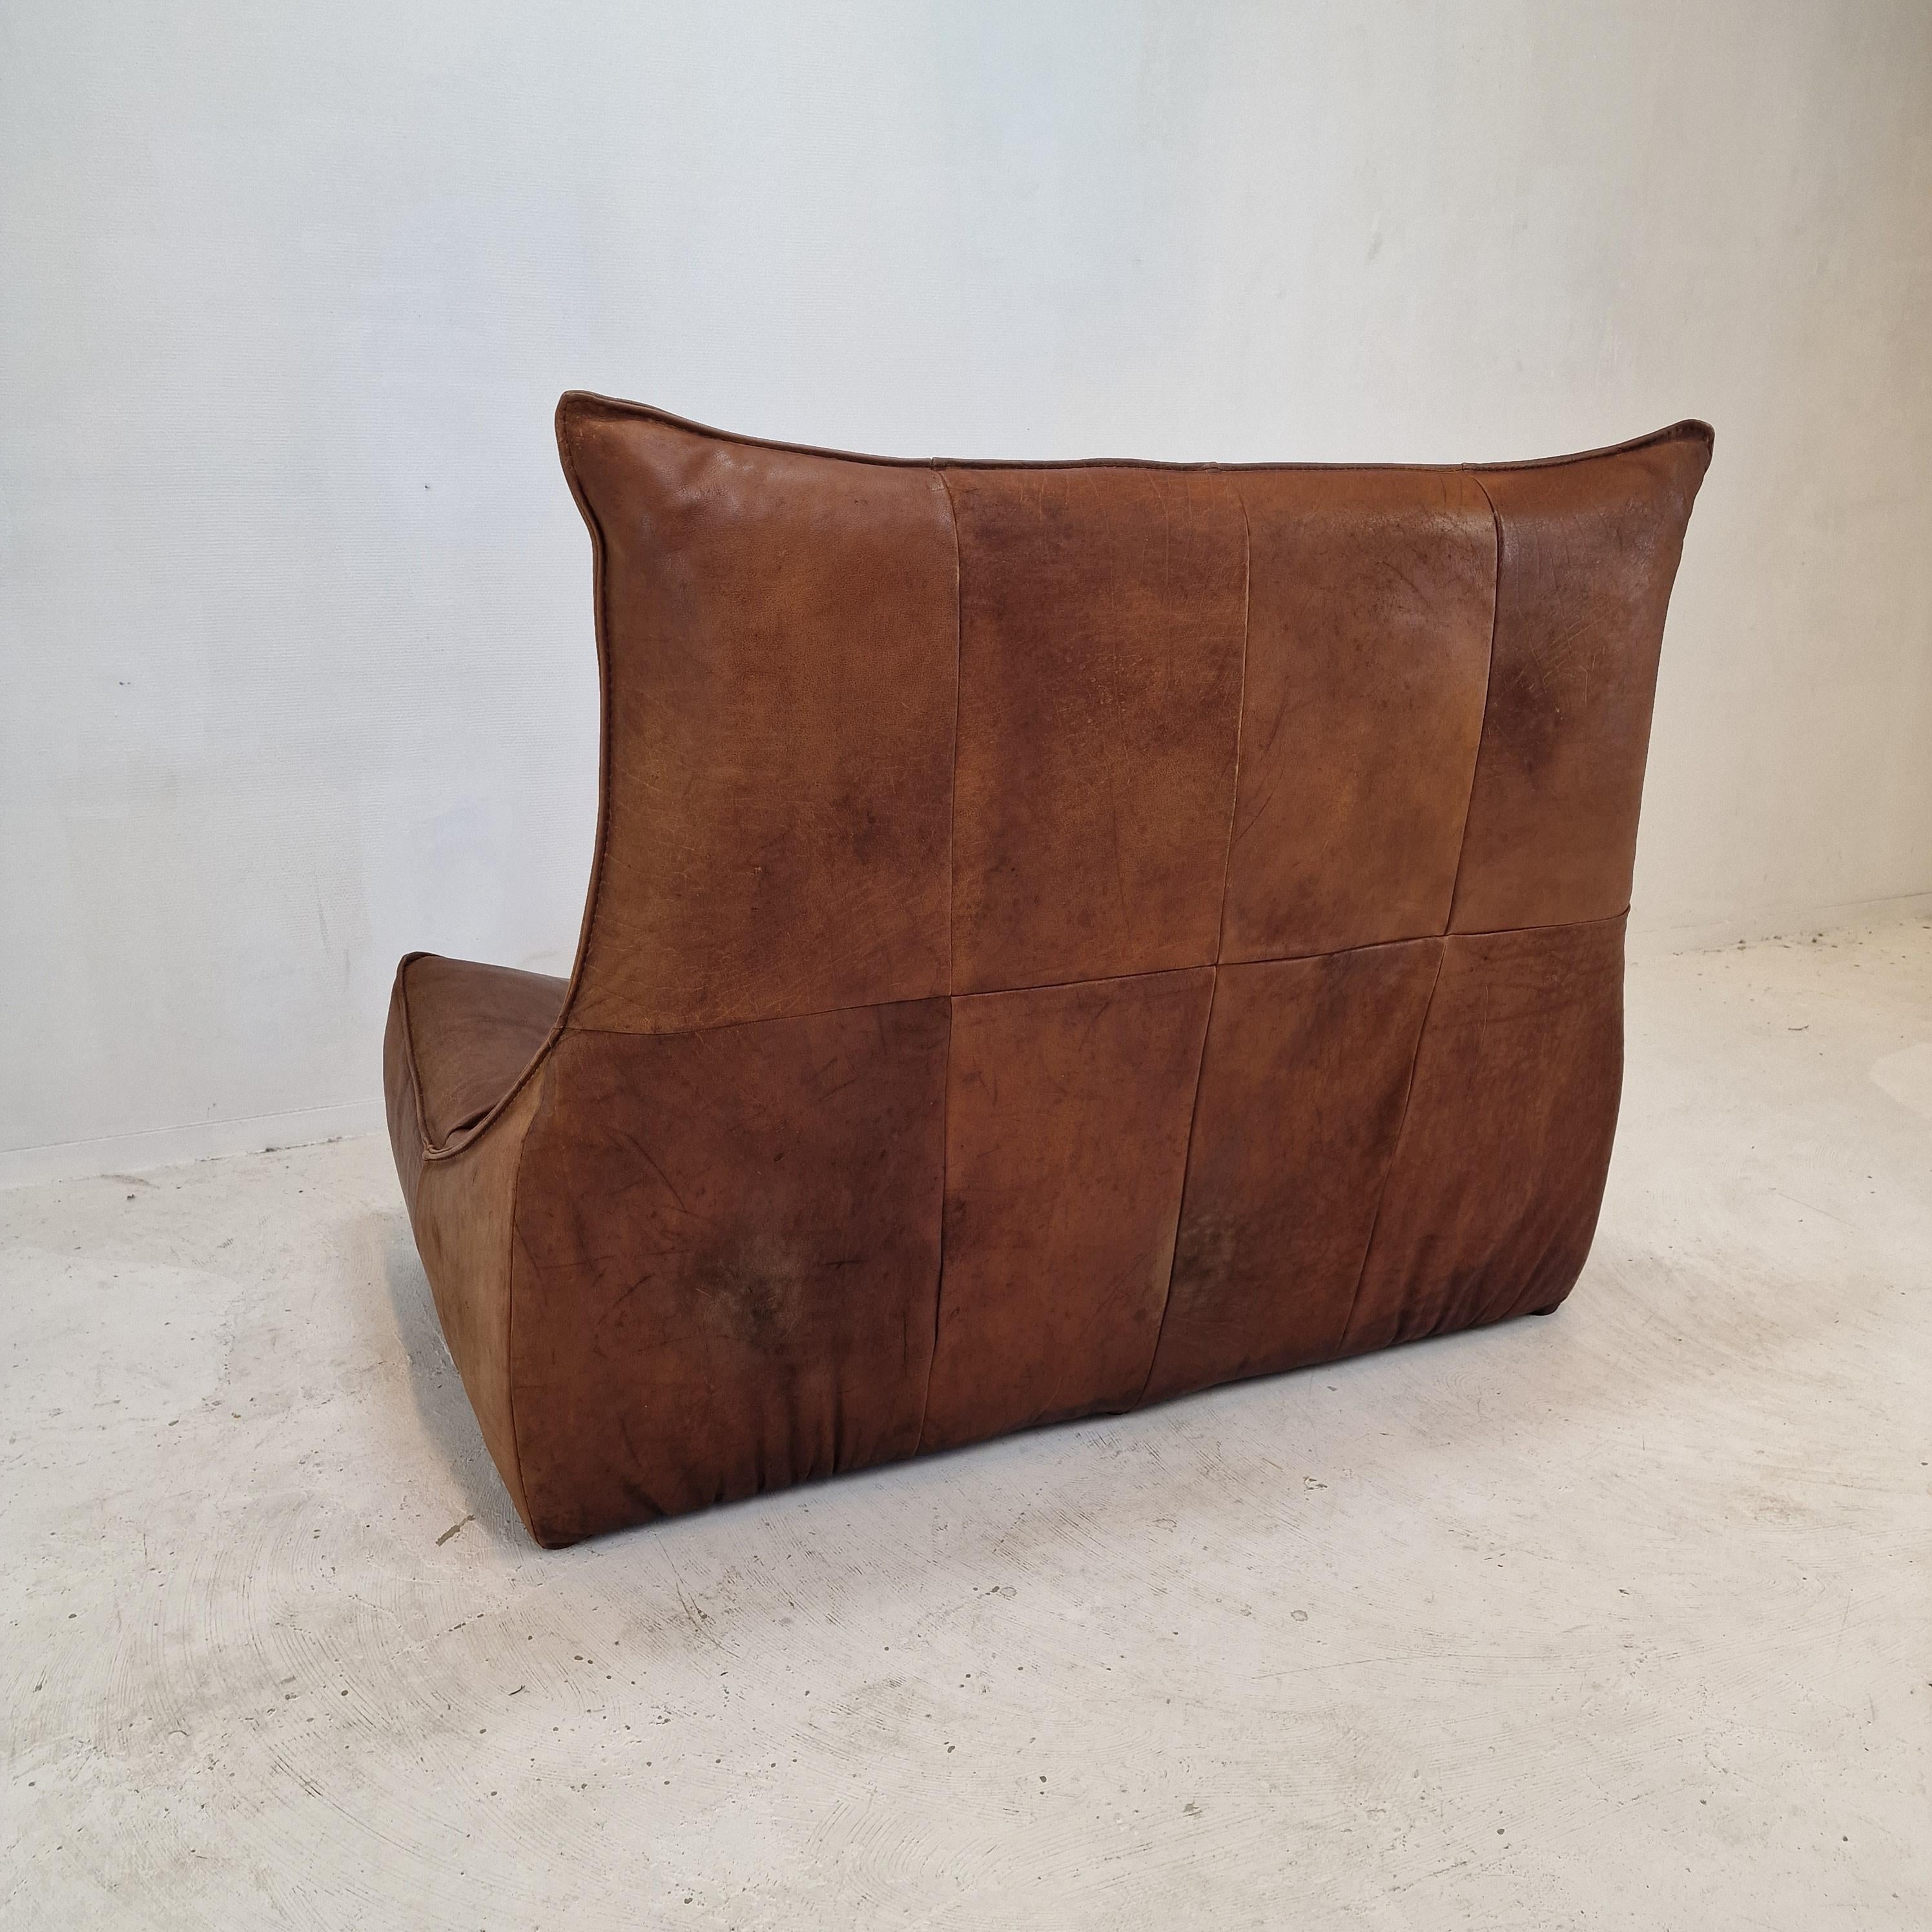 Montis “The Rock” Sofa In Brown Leather By Gerard Van Den Berg, 1970s For Sale 5